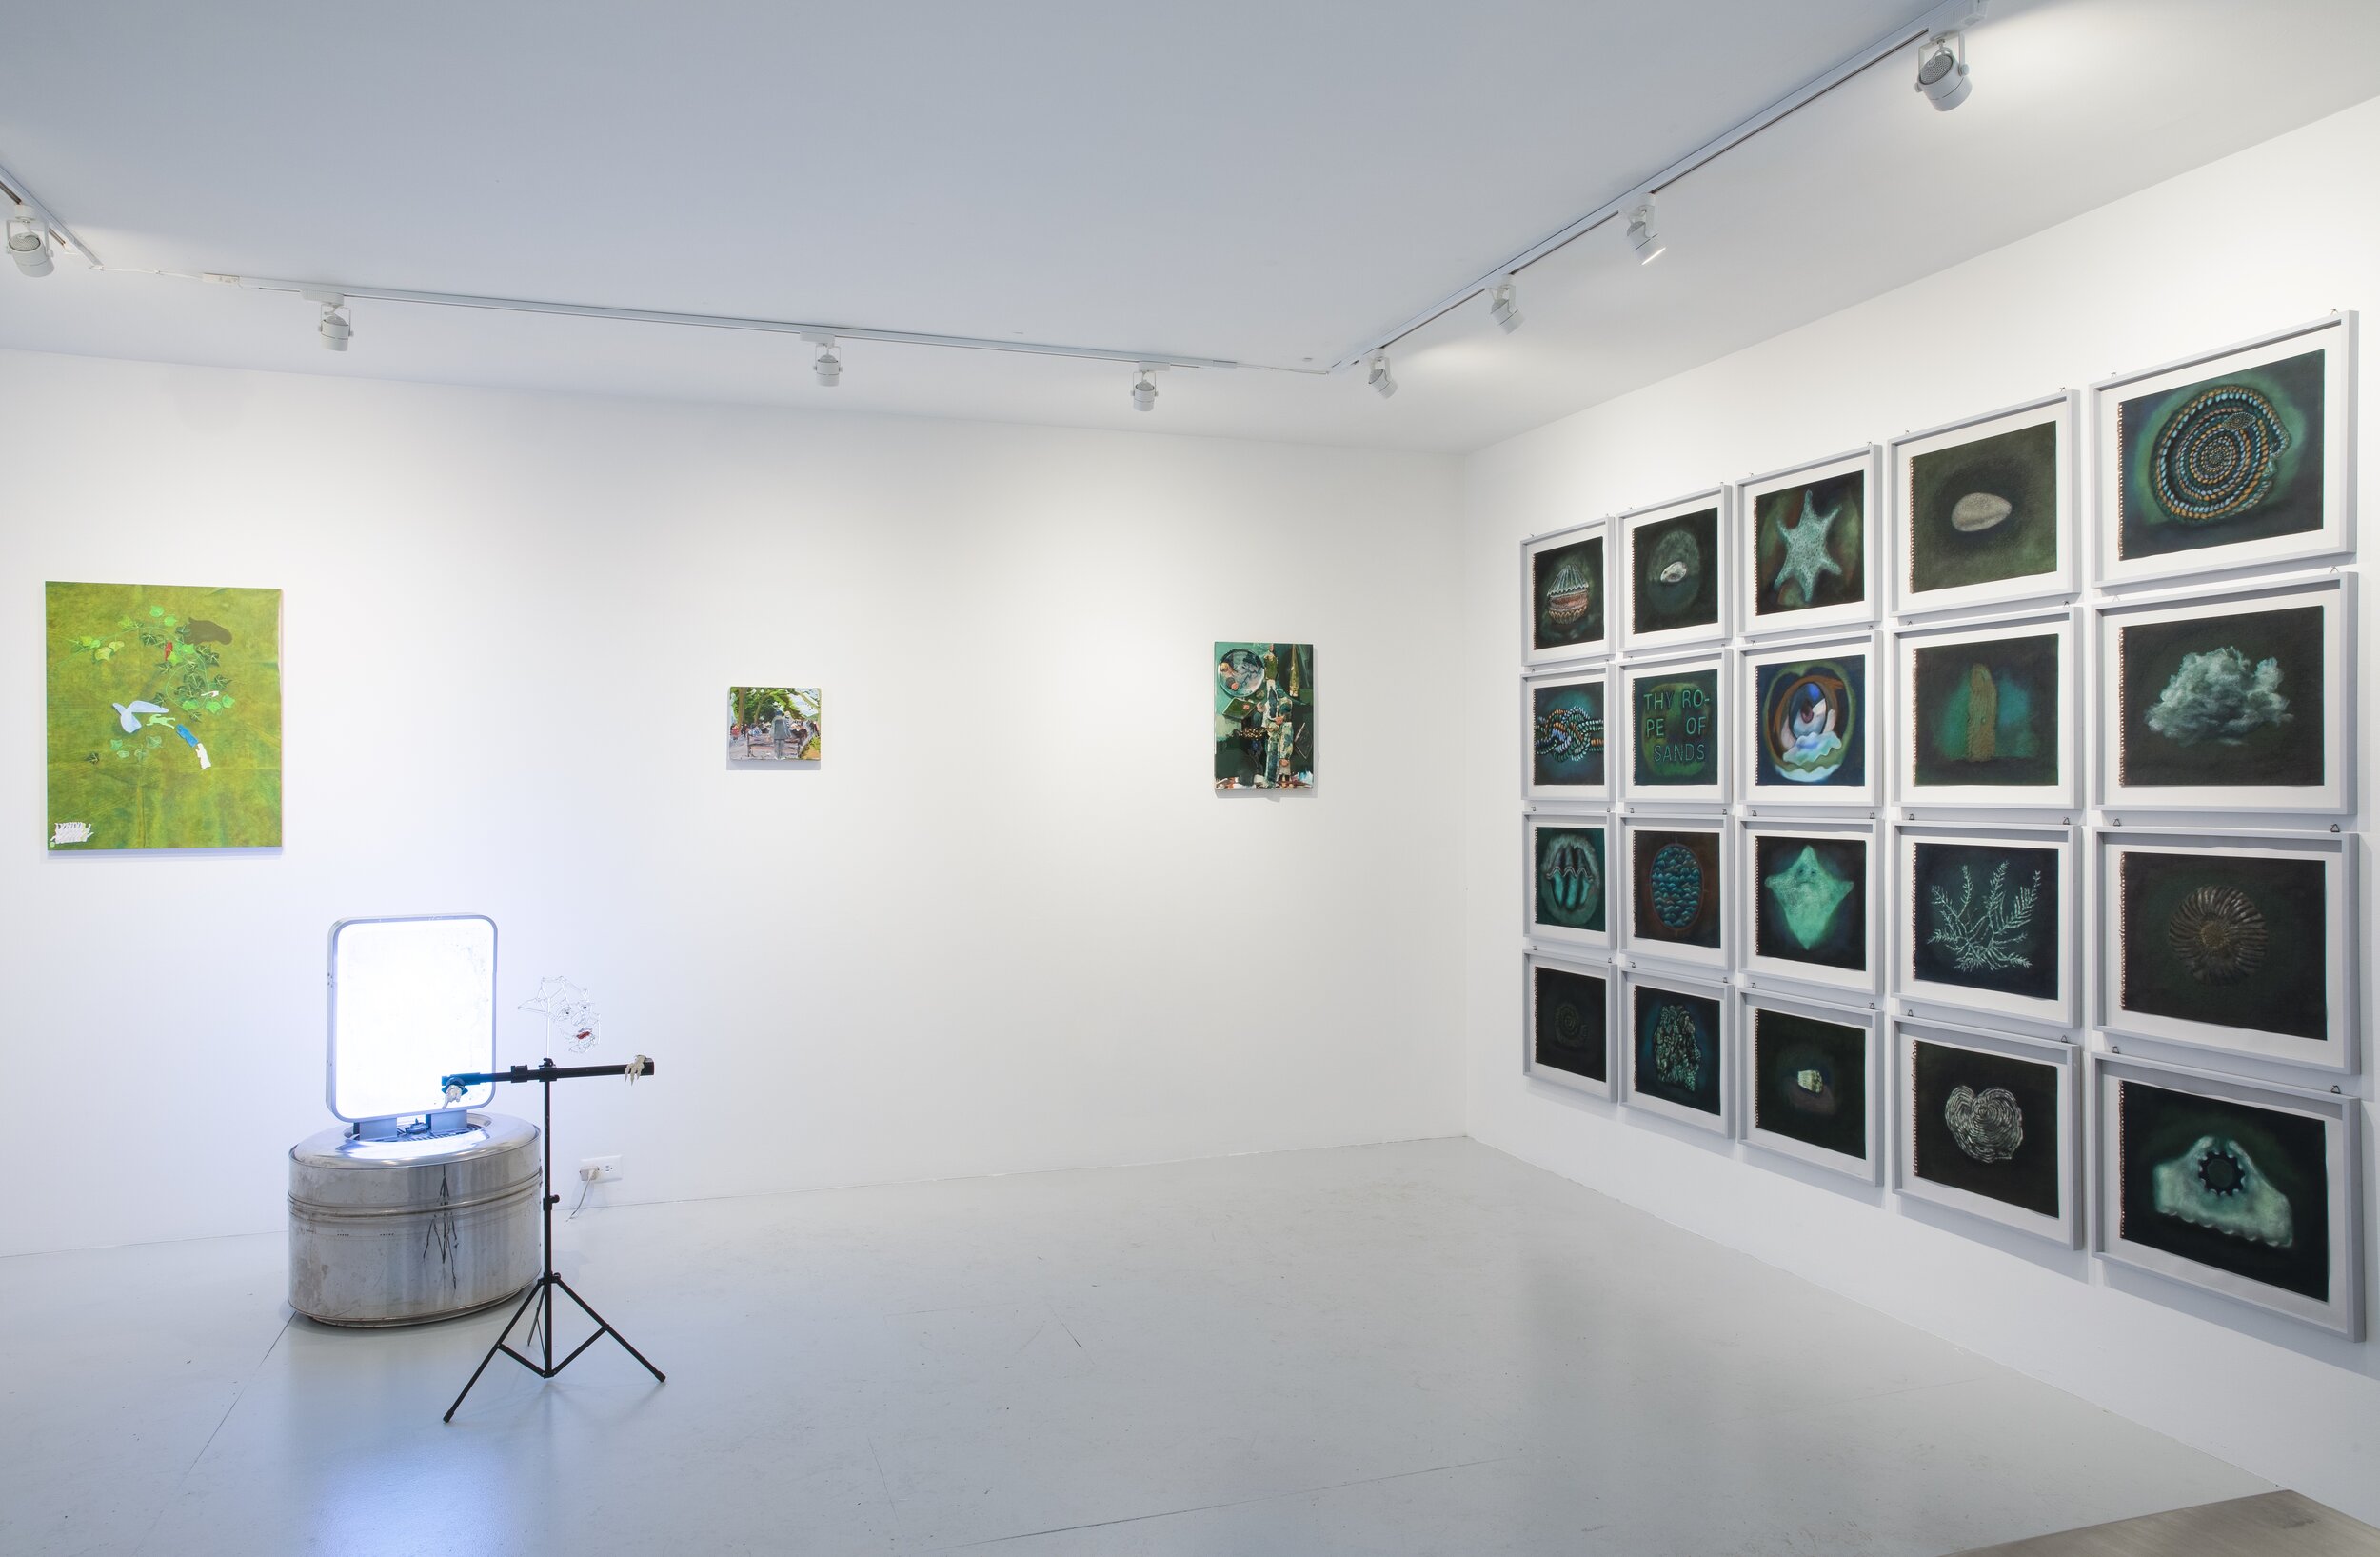  “Every Image is a Semblance of Rescue,” 2020, Pastel, paper, painted wooden frames, 17” X 20” (each frame), Installation view 